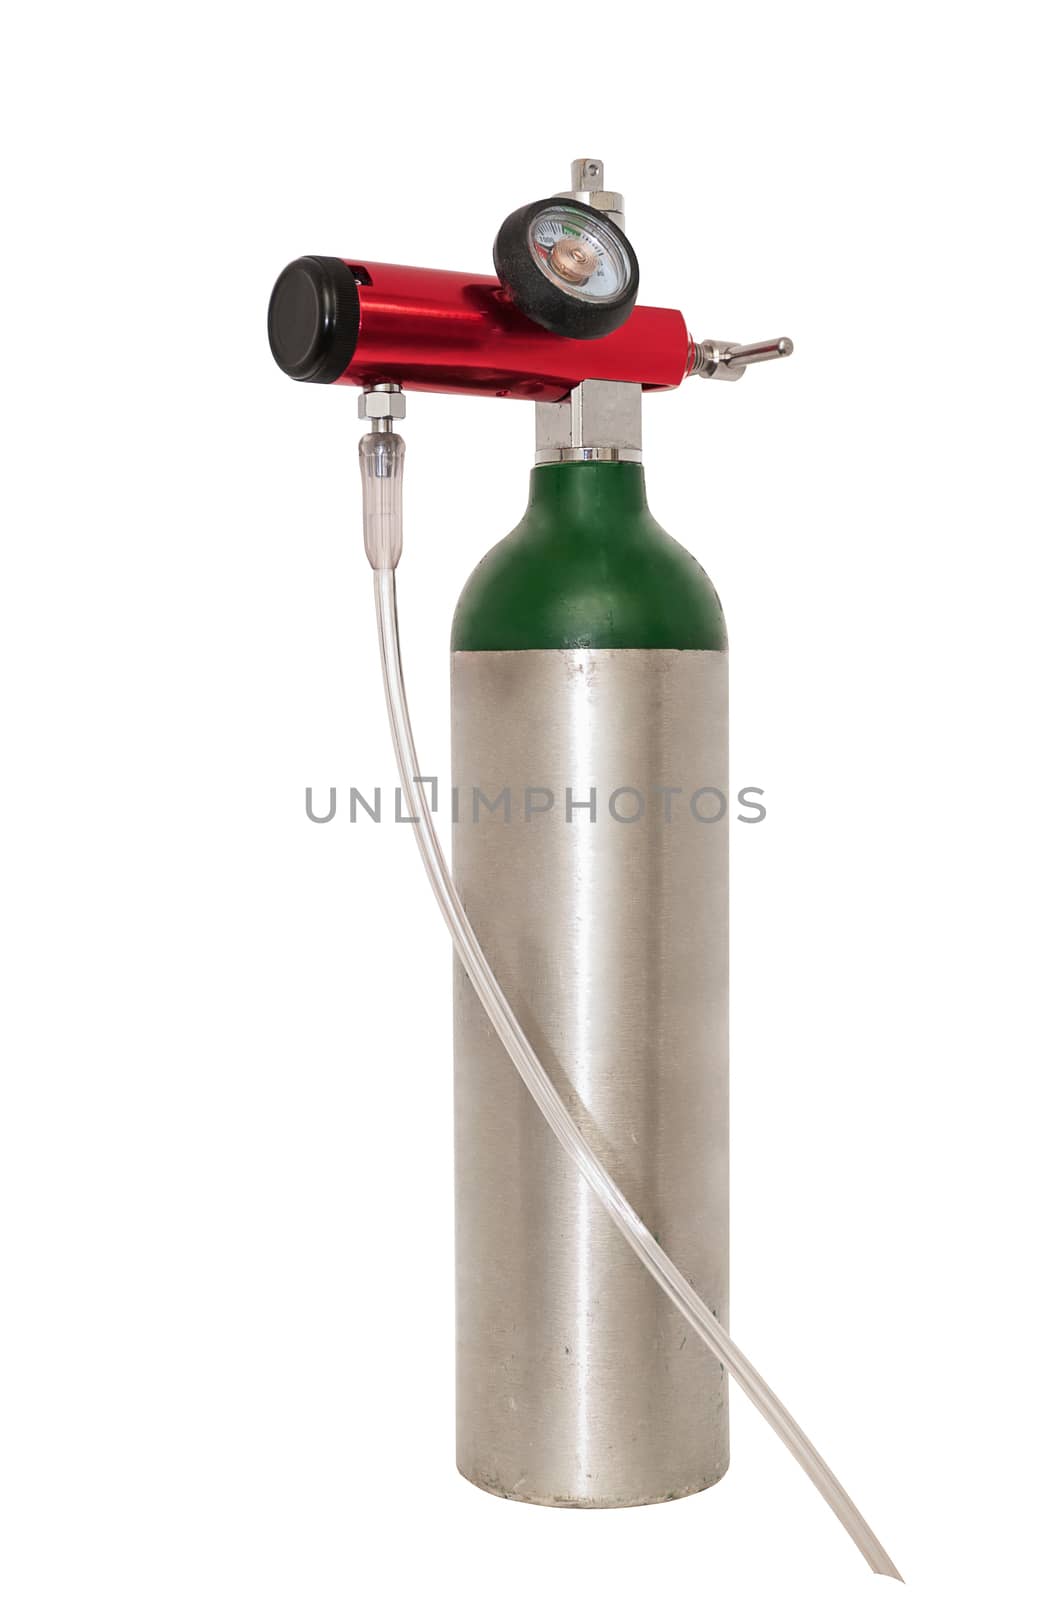 Portable Oxygen Cylinder For Medical Use by rcarner